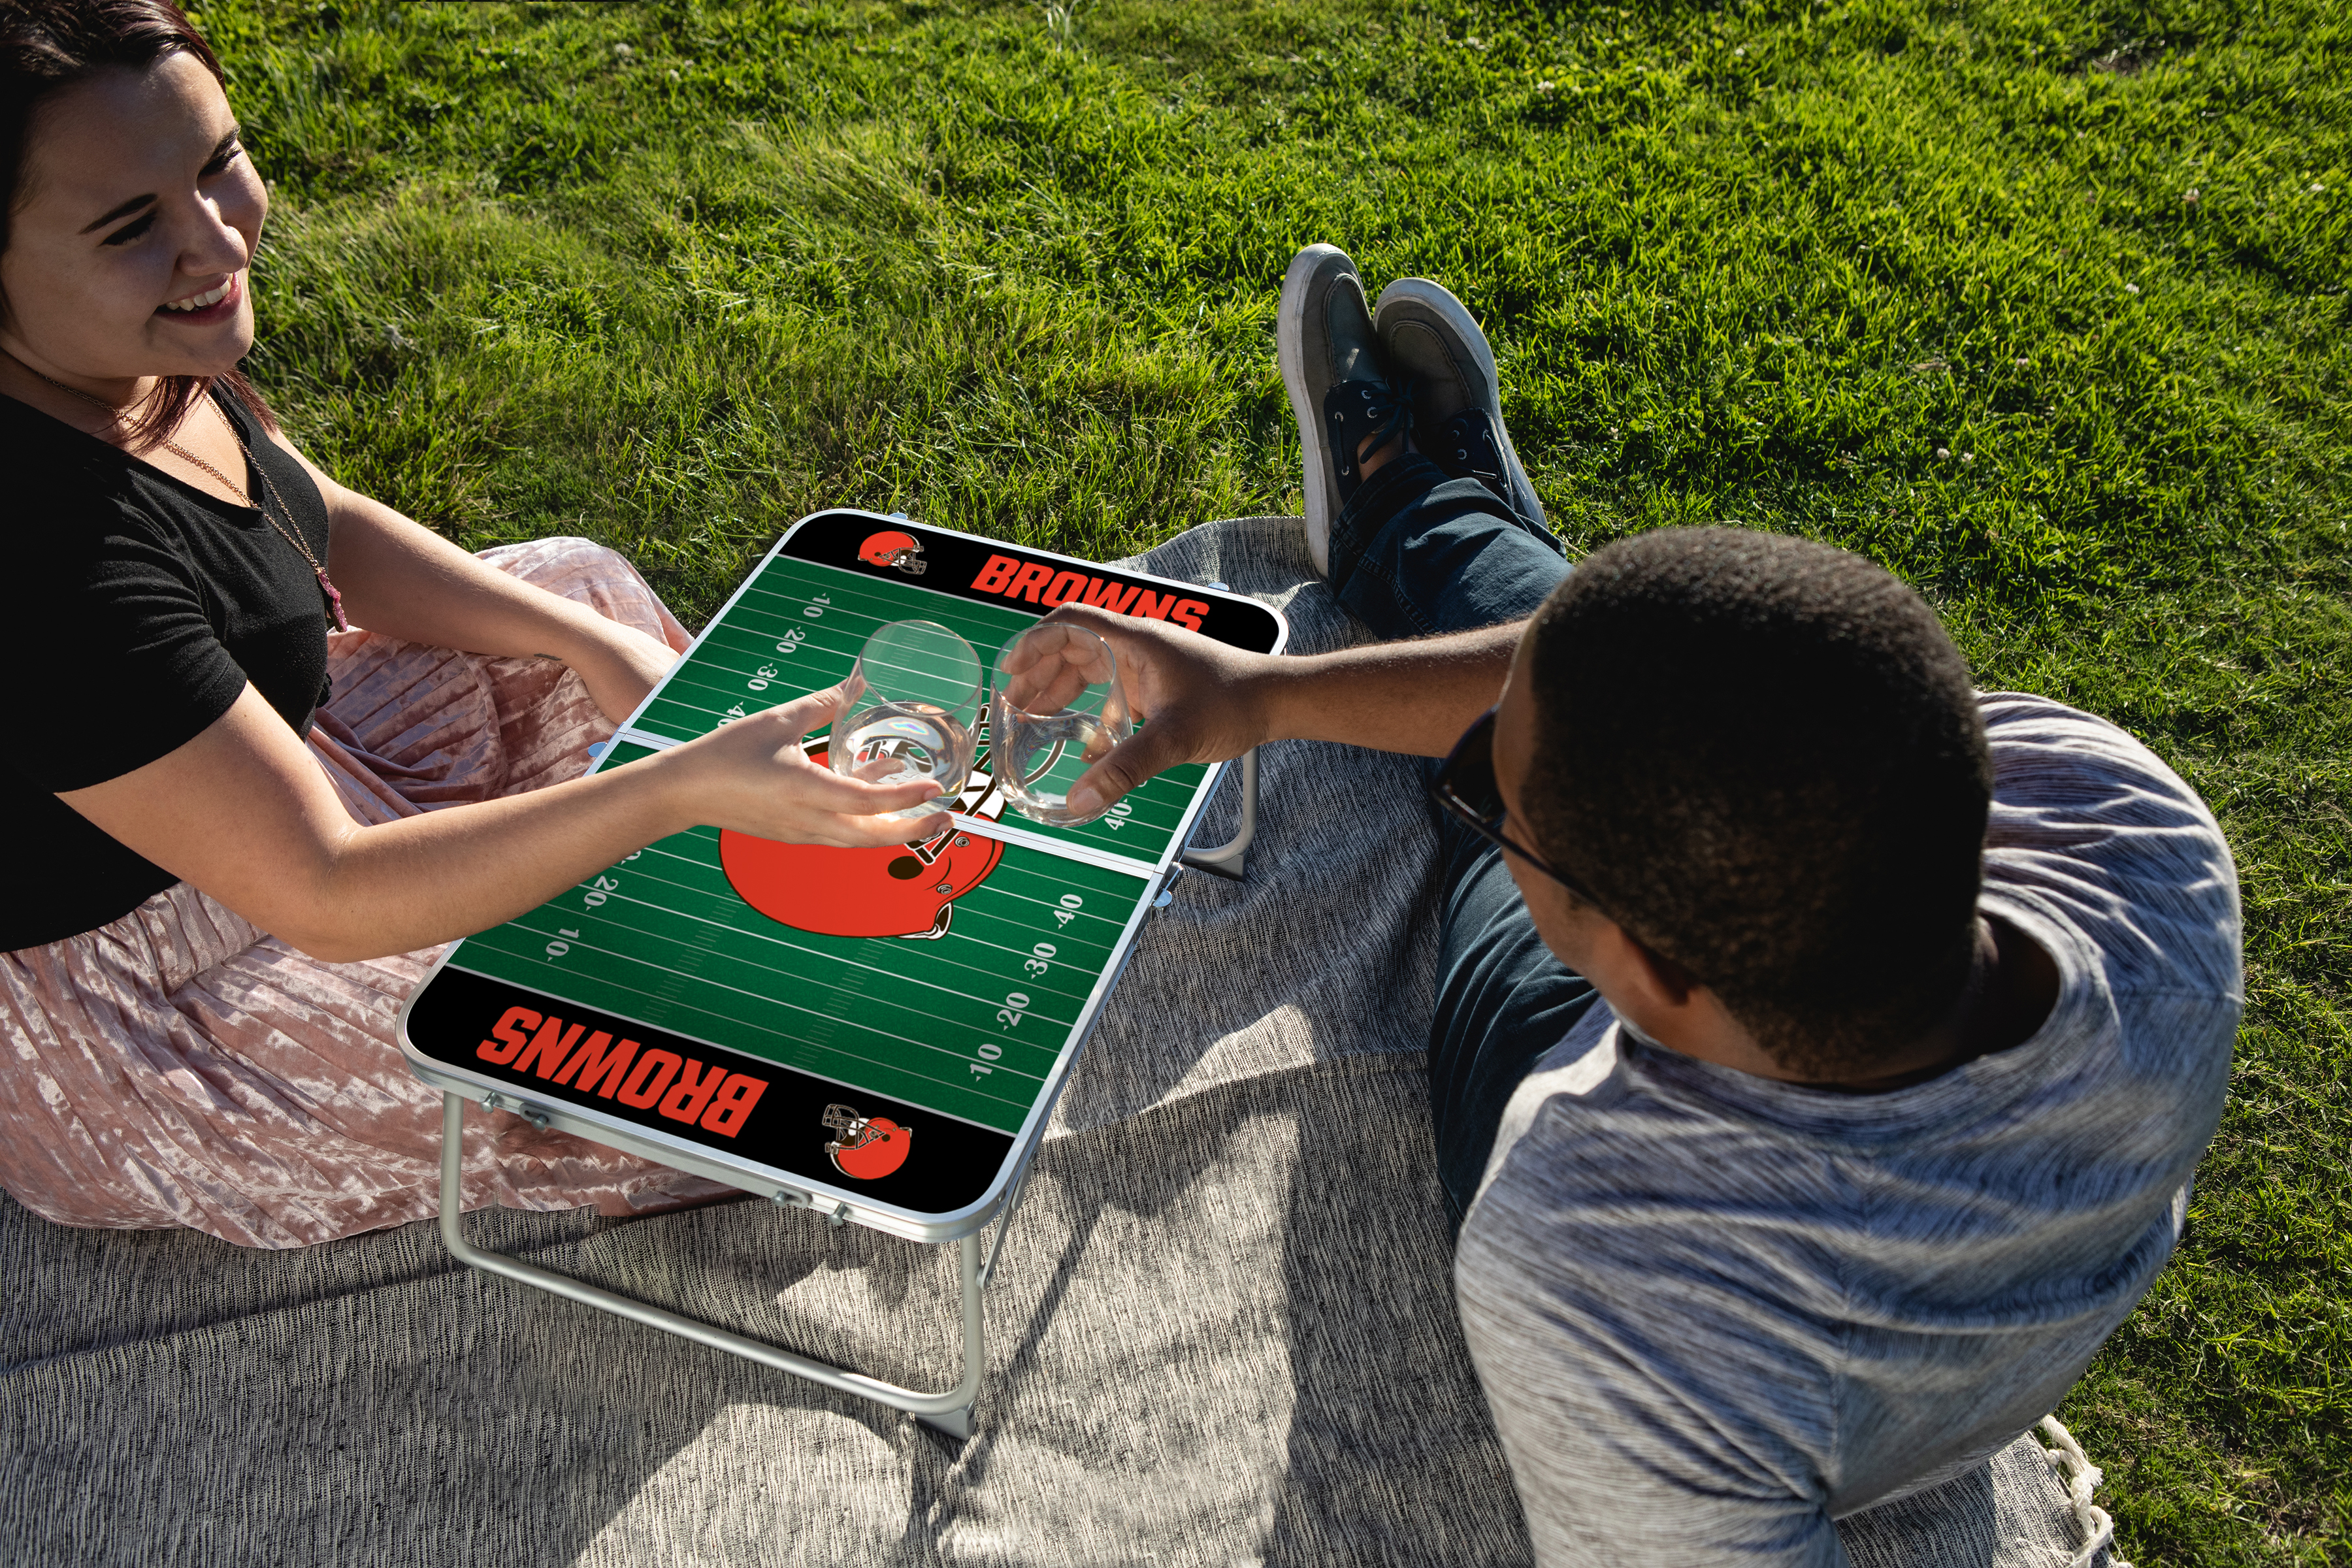 Cleveland Browns - Concert Table Mini Portable Table